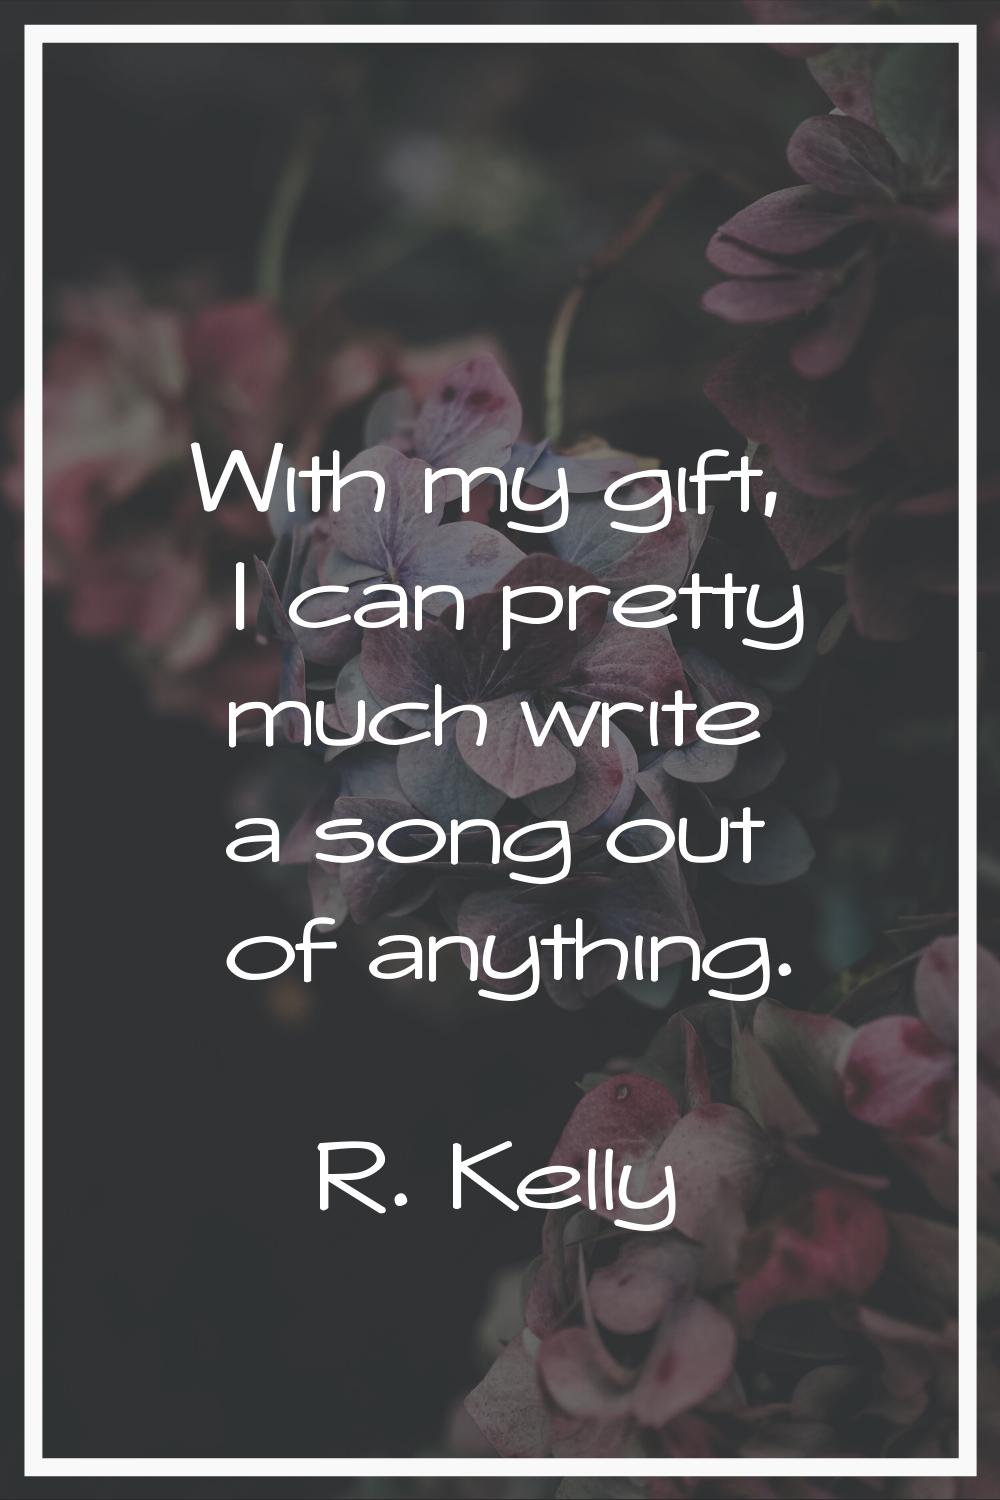 With my gift, I can pretty much write a song out of anything.